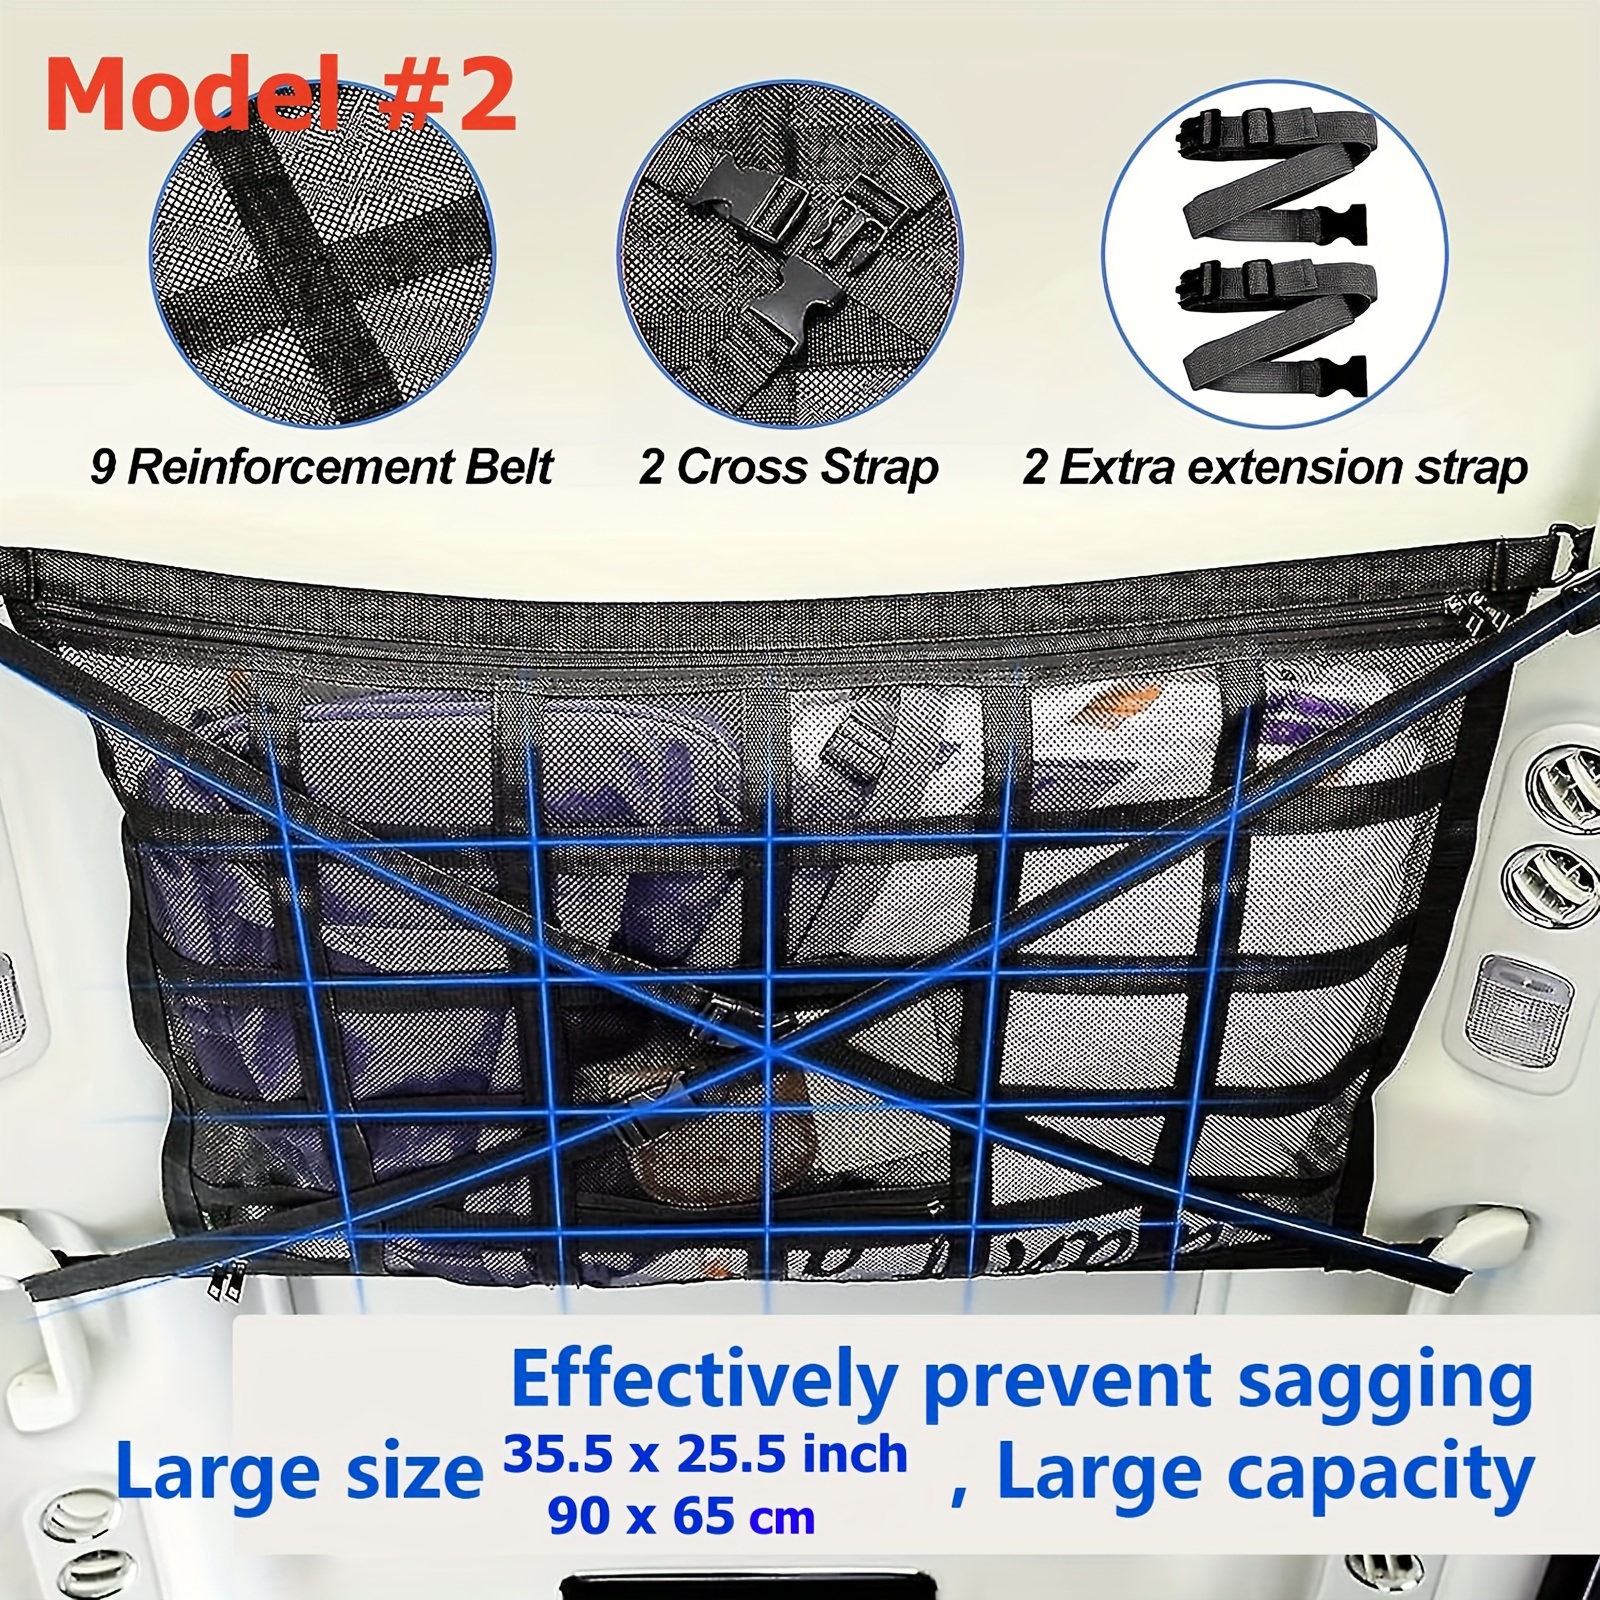 Reinforced Mesh Roof Storage Organizer Truck Suv Travel Camping